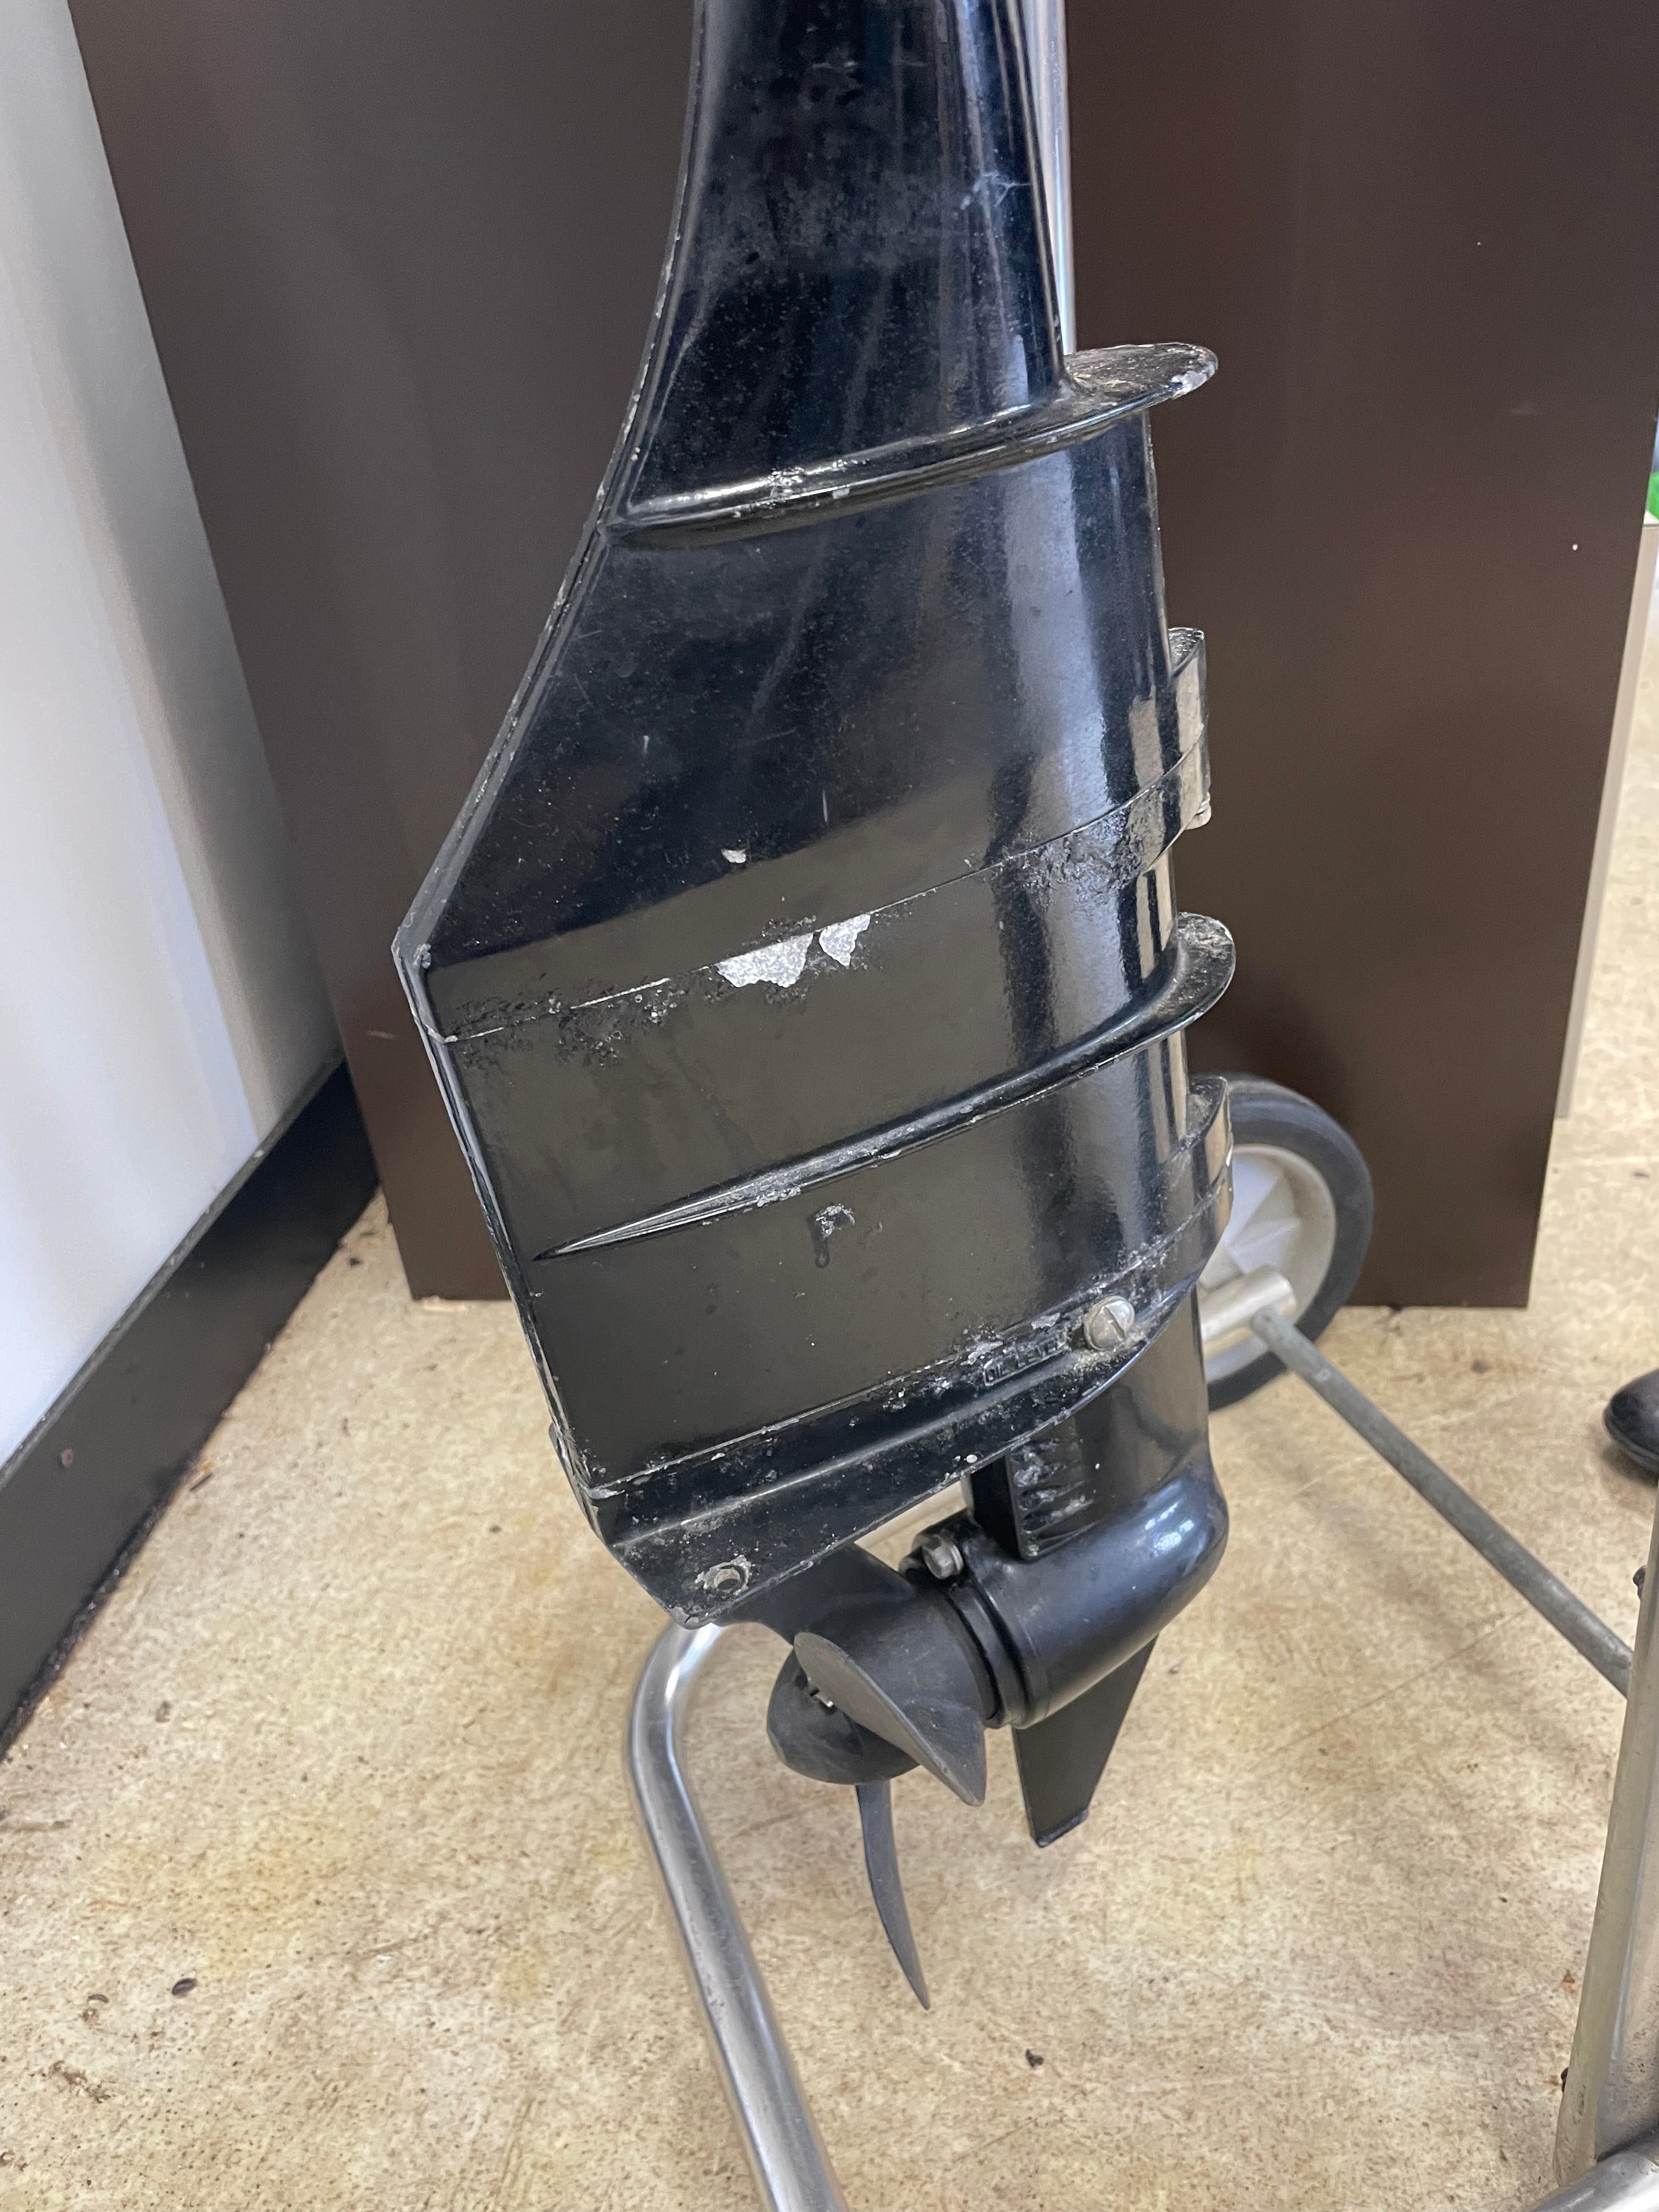 13.3 2-Stroke Outboard Engine 1997 (Approved Used)